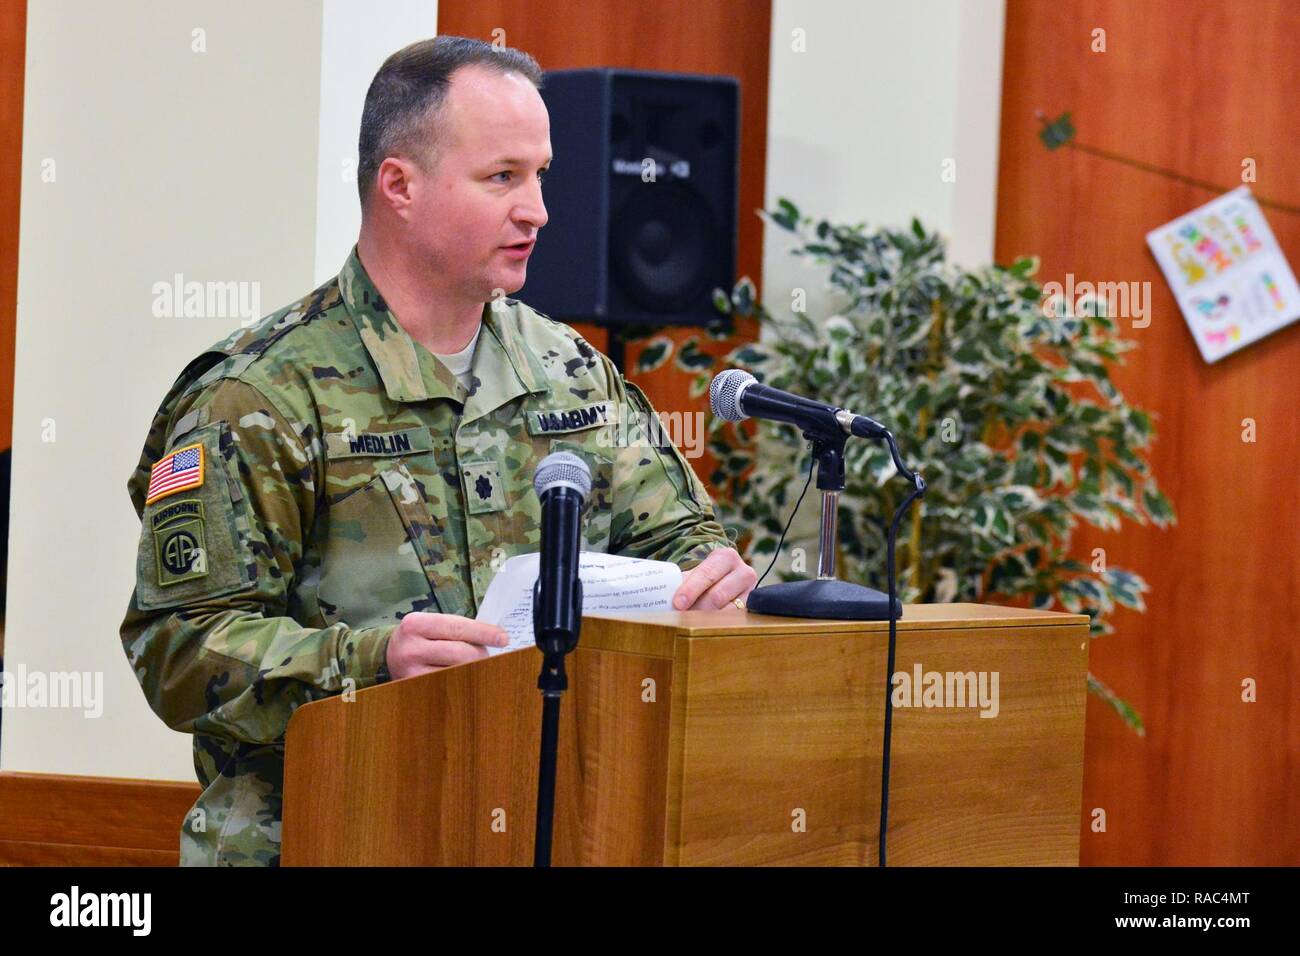 Lt. Col. Brett M. Medlin, Battalion Commander U.S. Army Africa, addresses the audience during Martin Luther King, Jr. Day observances, at Vicenza Military Community’s 2017 Observance Ceremony at Caserma Ederle, Vicenza, Italy, Jan. 10, 2017. Stock Photo